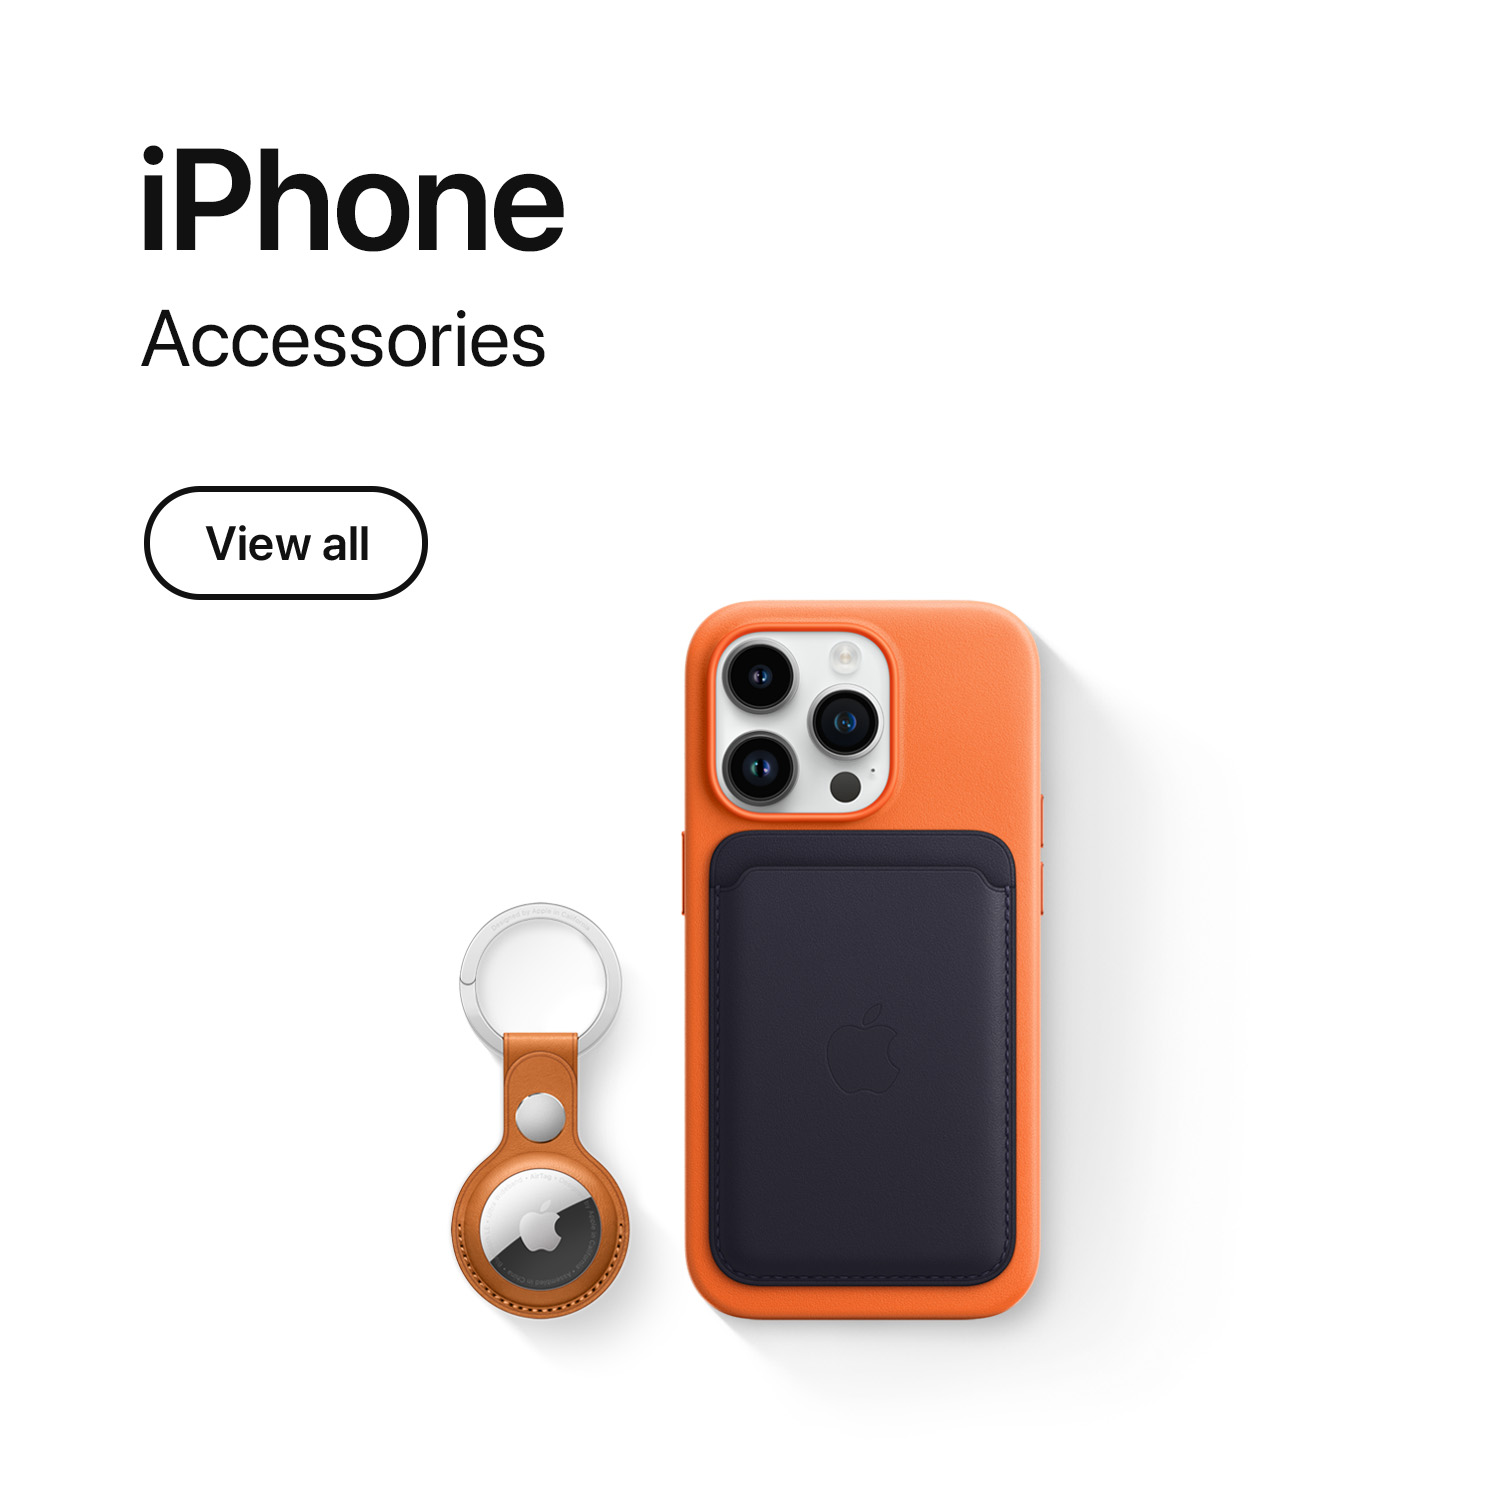 Apple-Products-Accessories-Merchandise